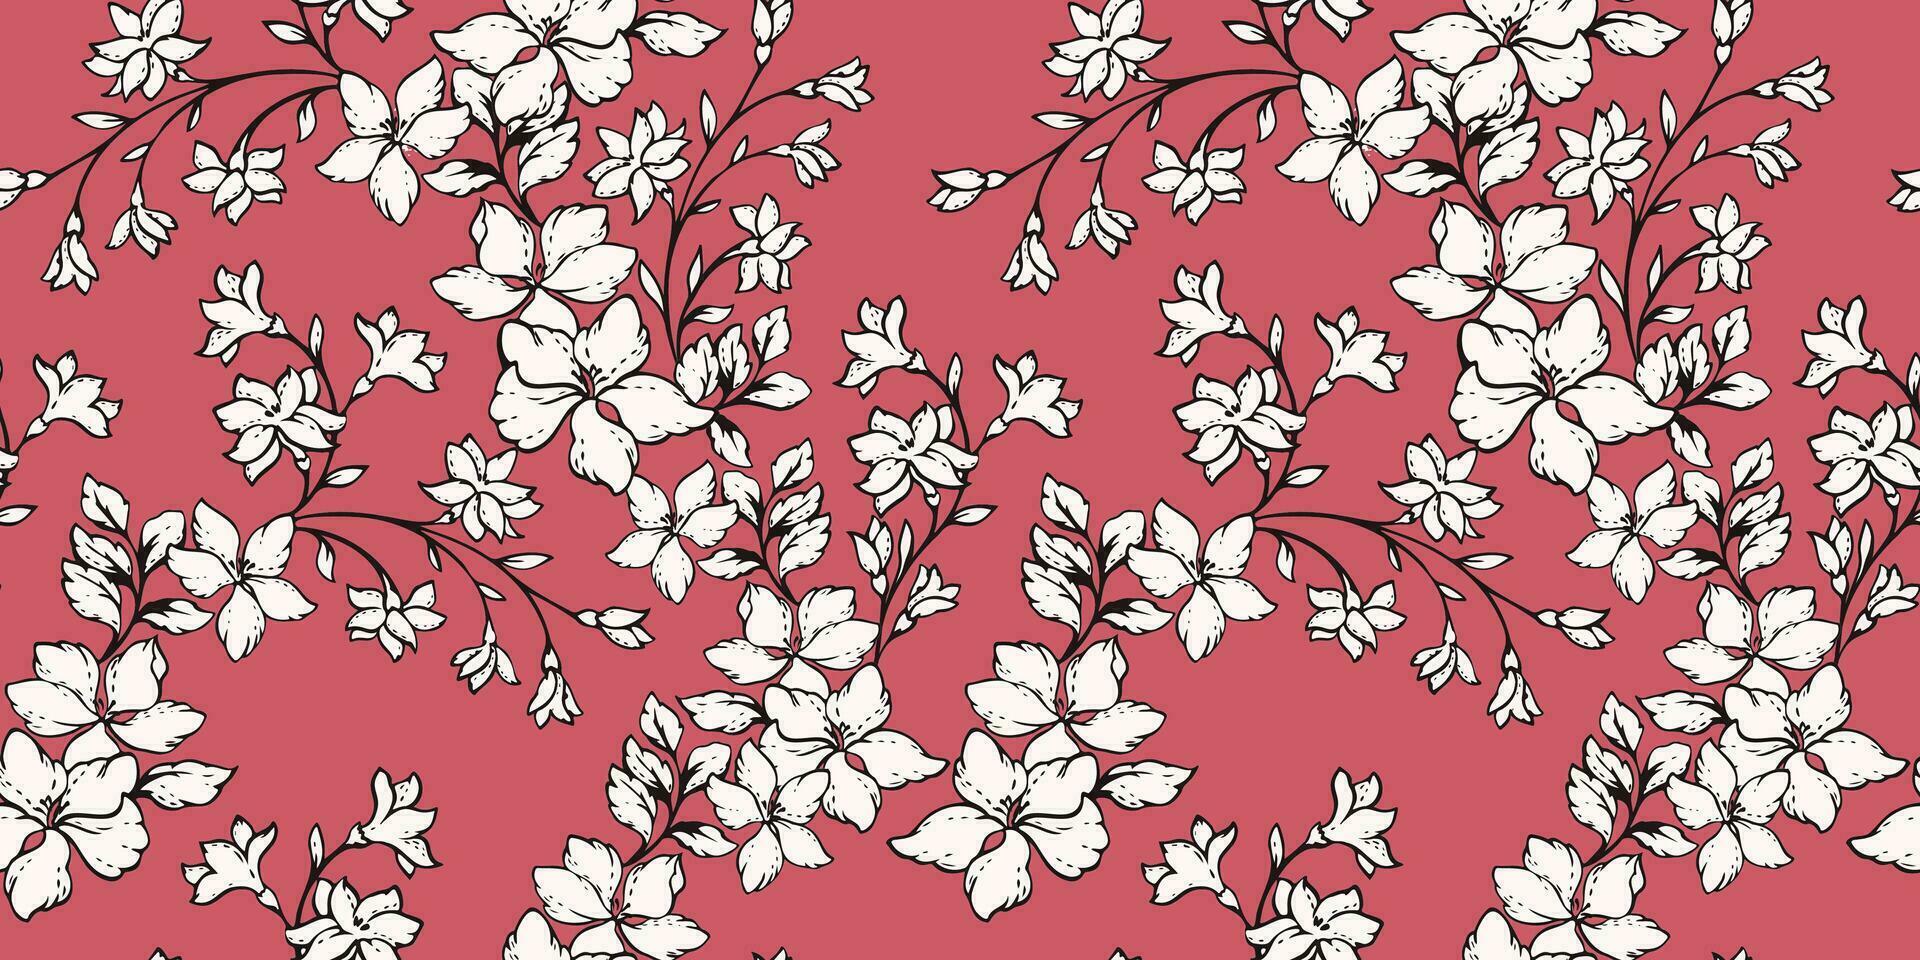 Abstract artistic branches flowers in a intertwined seamless pattern. Vector hand drawn. Blooming spring or summer meadow burgundy print. Template for design, textile, fabric, wallpaper, fashion